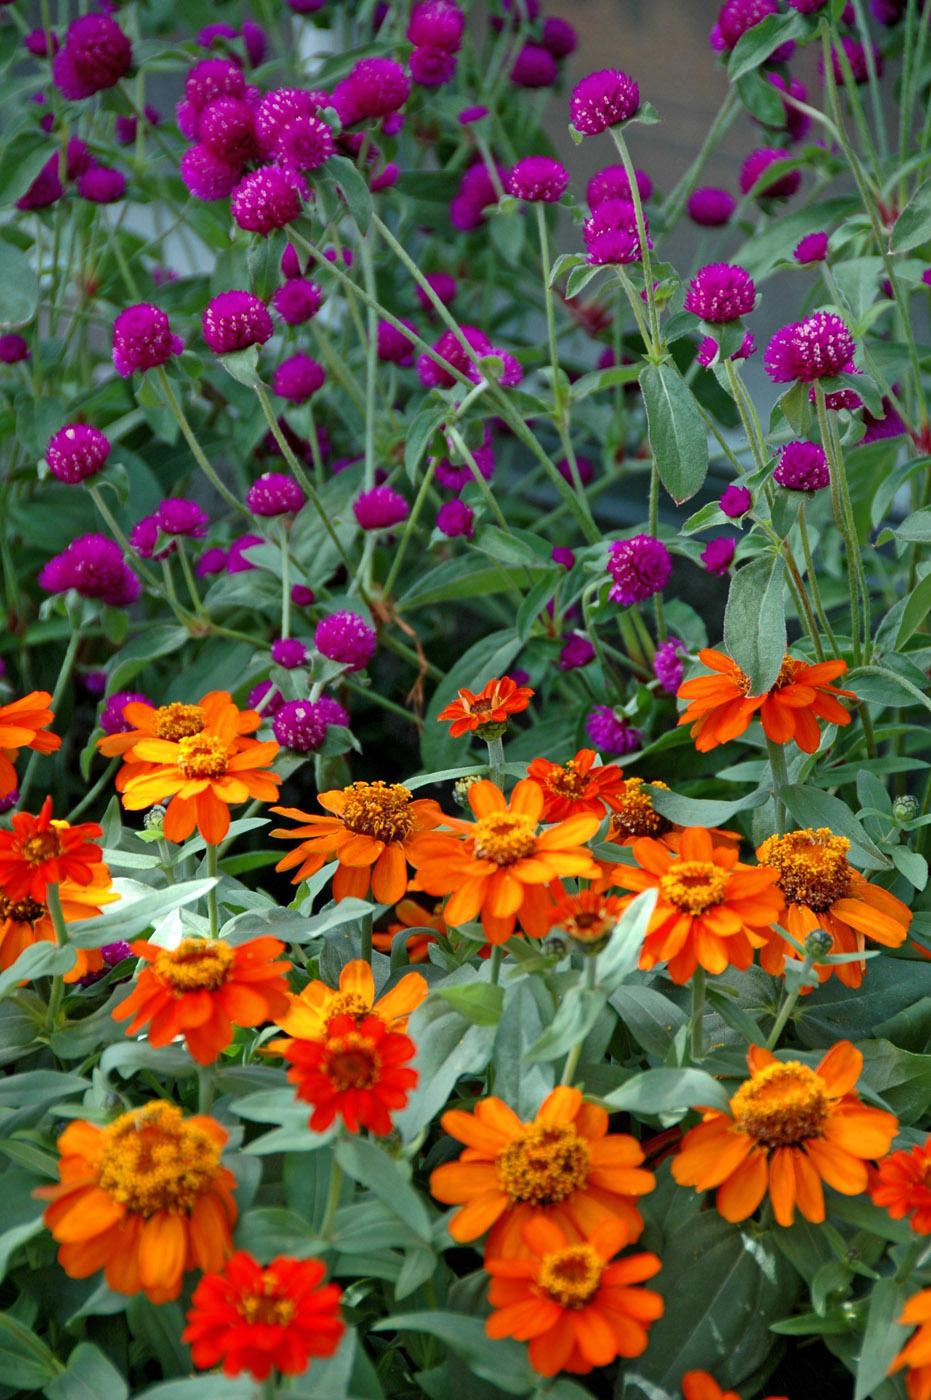 The All Around Purple gomphrena is a real trooper, reaching 24 inches tall and wide and blooming all summer in the South's intense heat and humidity. It is also quite attractive with orange flowers like the Profusion Fire zinnia. (Photo by Norman Winter)